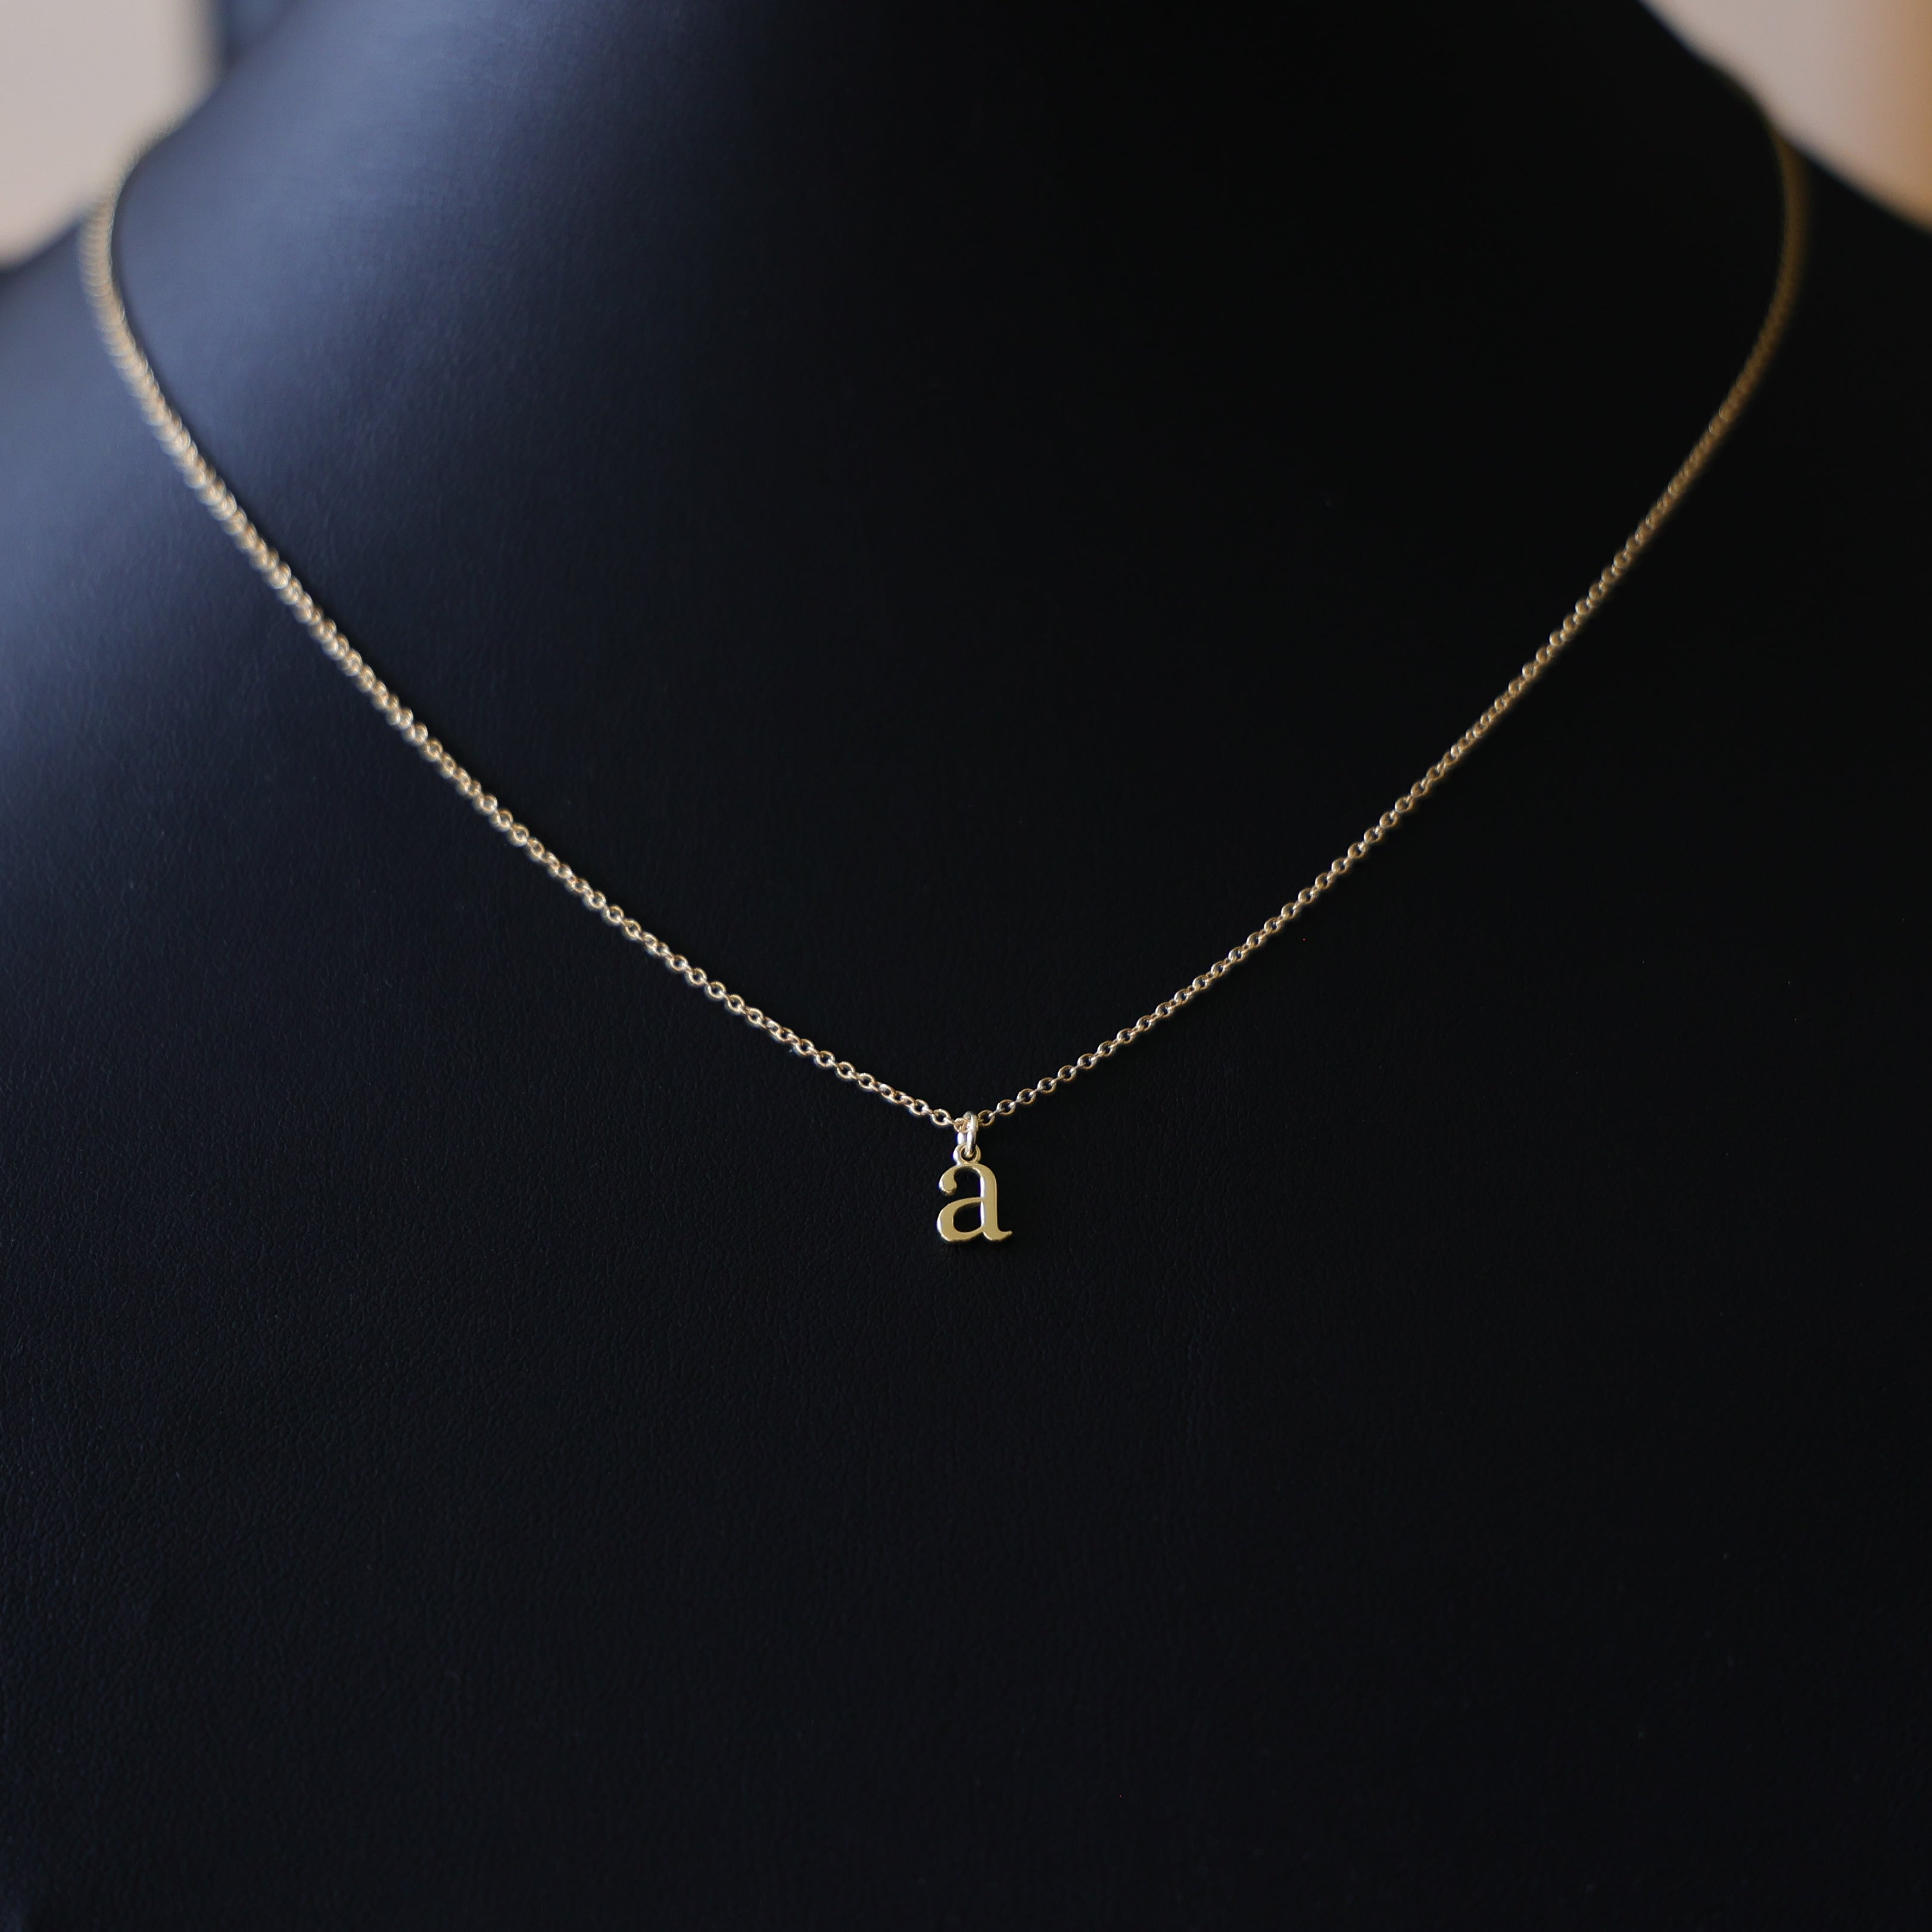 14K Gold Elegant Lowercase 'a' Initial Choker Necklace - Charlie & Co. Jewelry